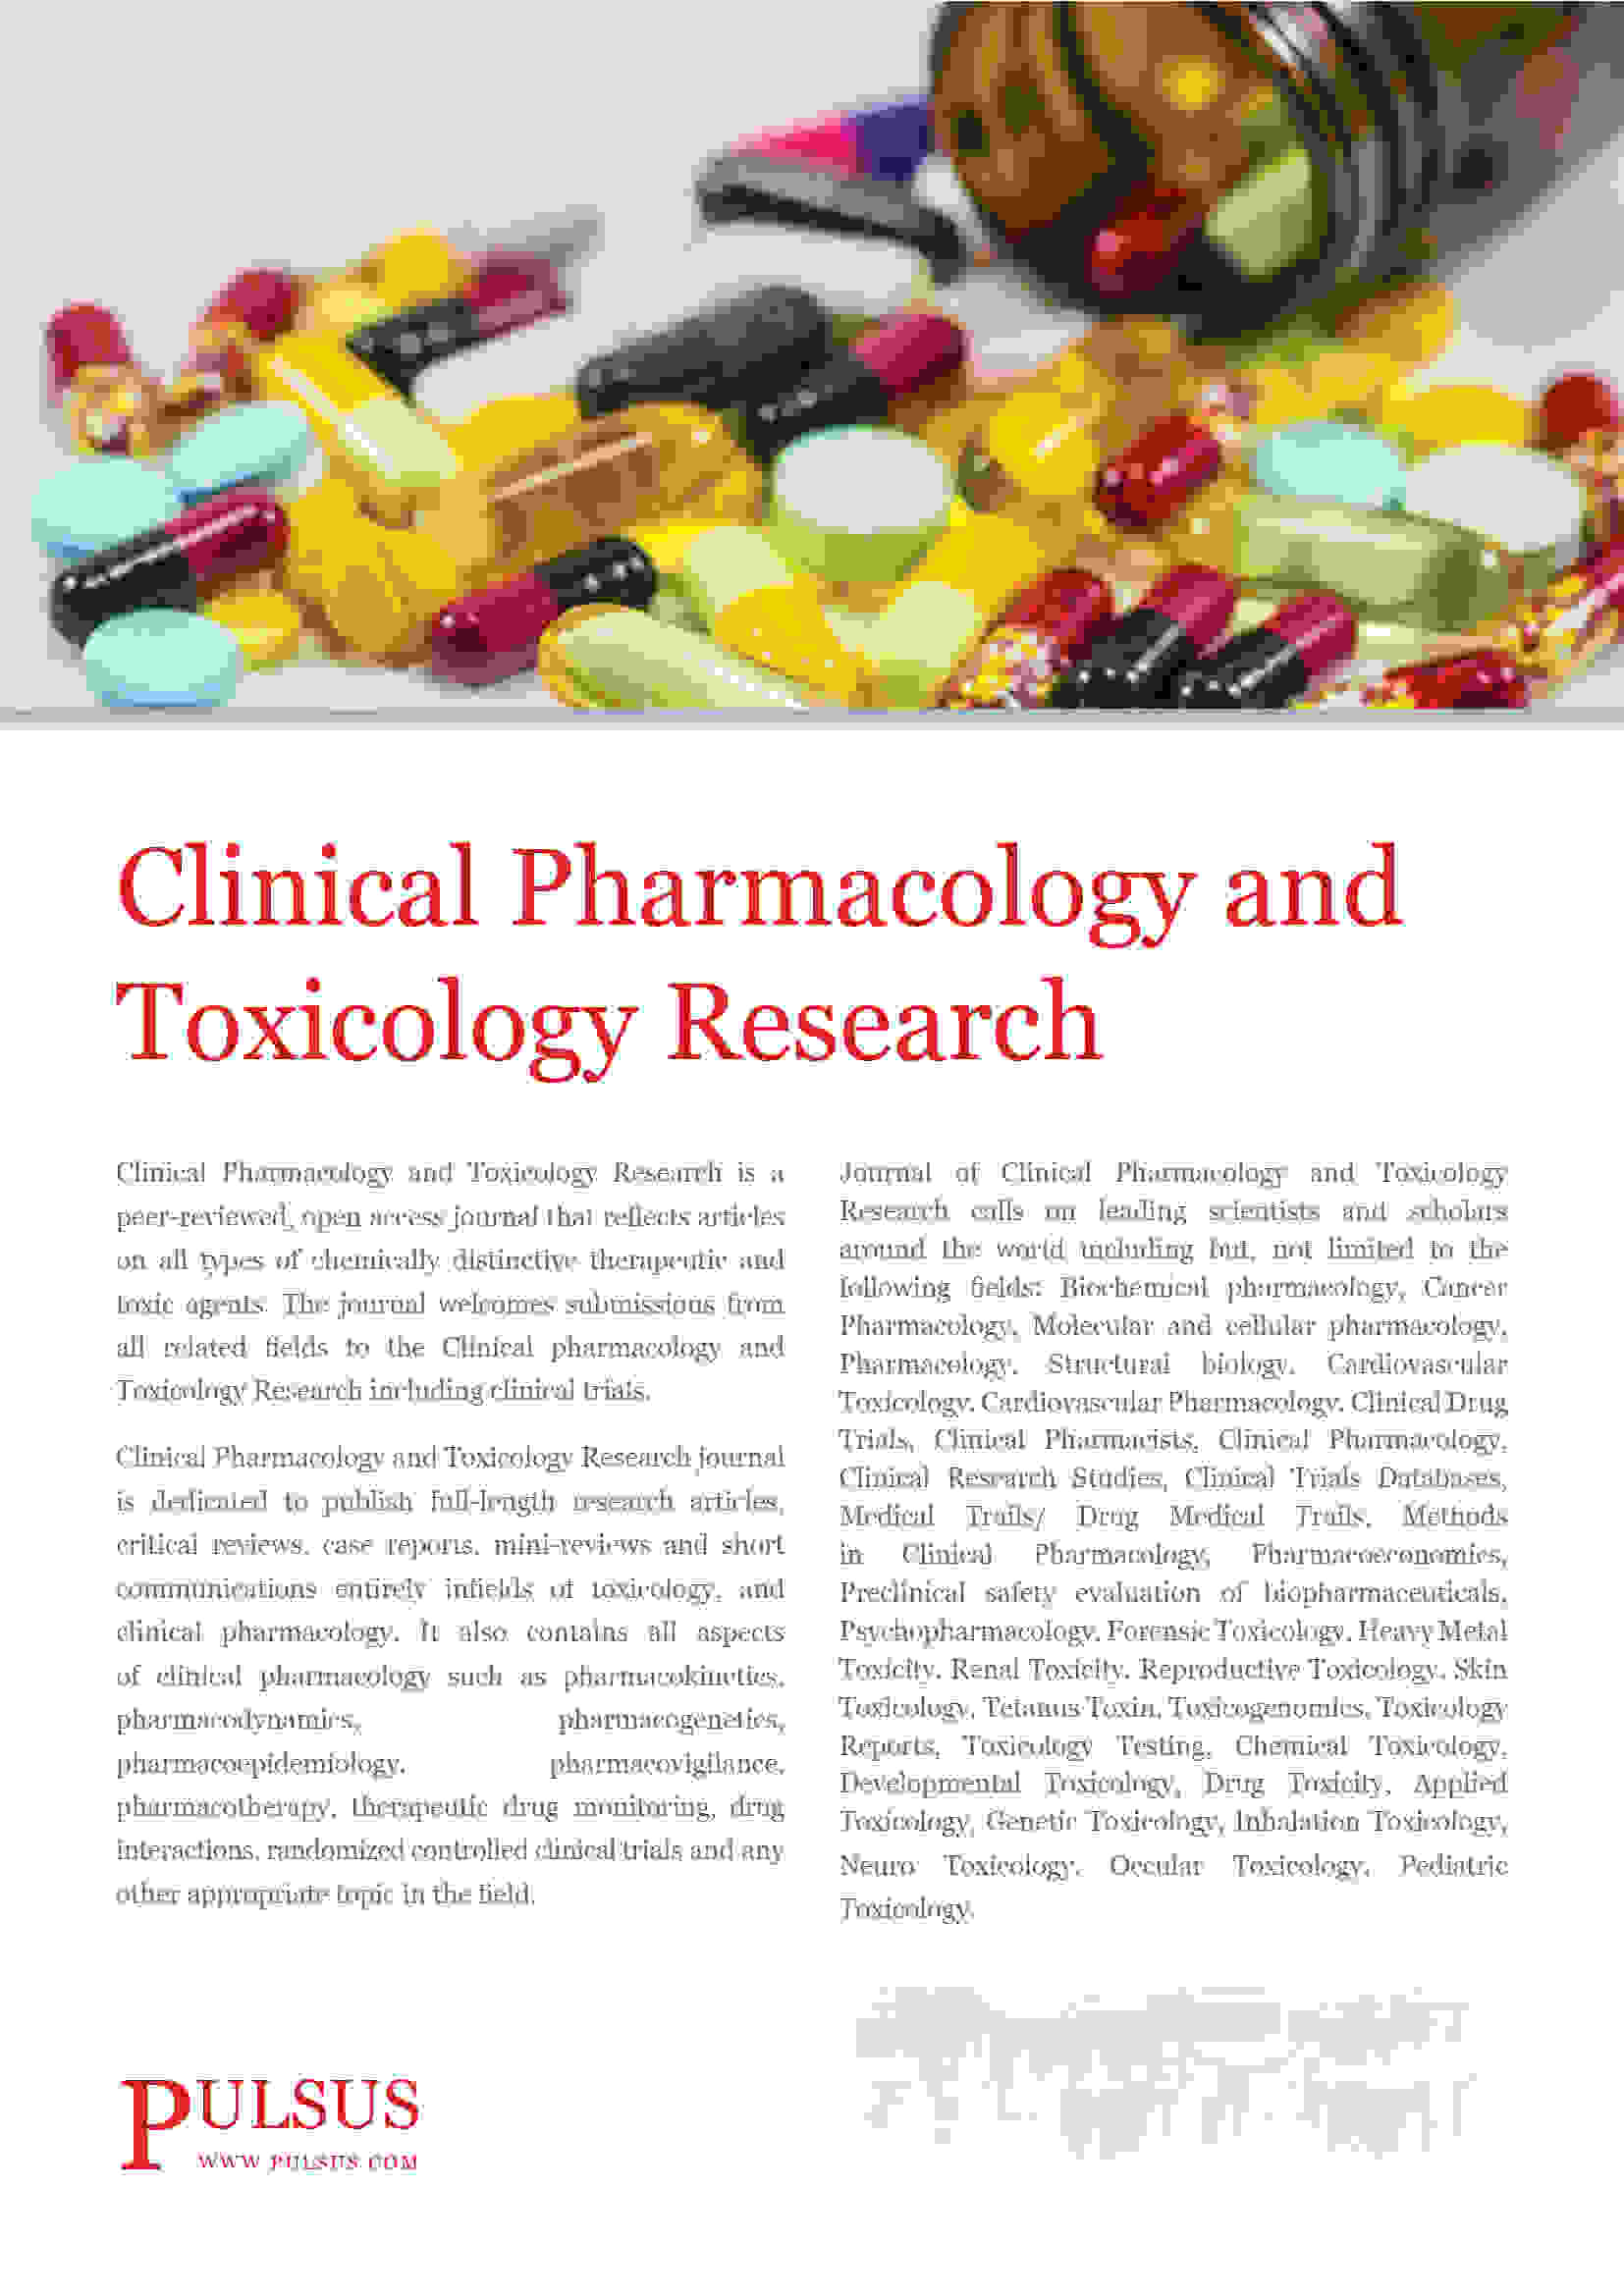 Clinical Pharmacology and Toxicology Research